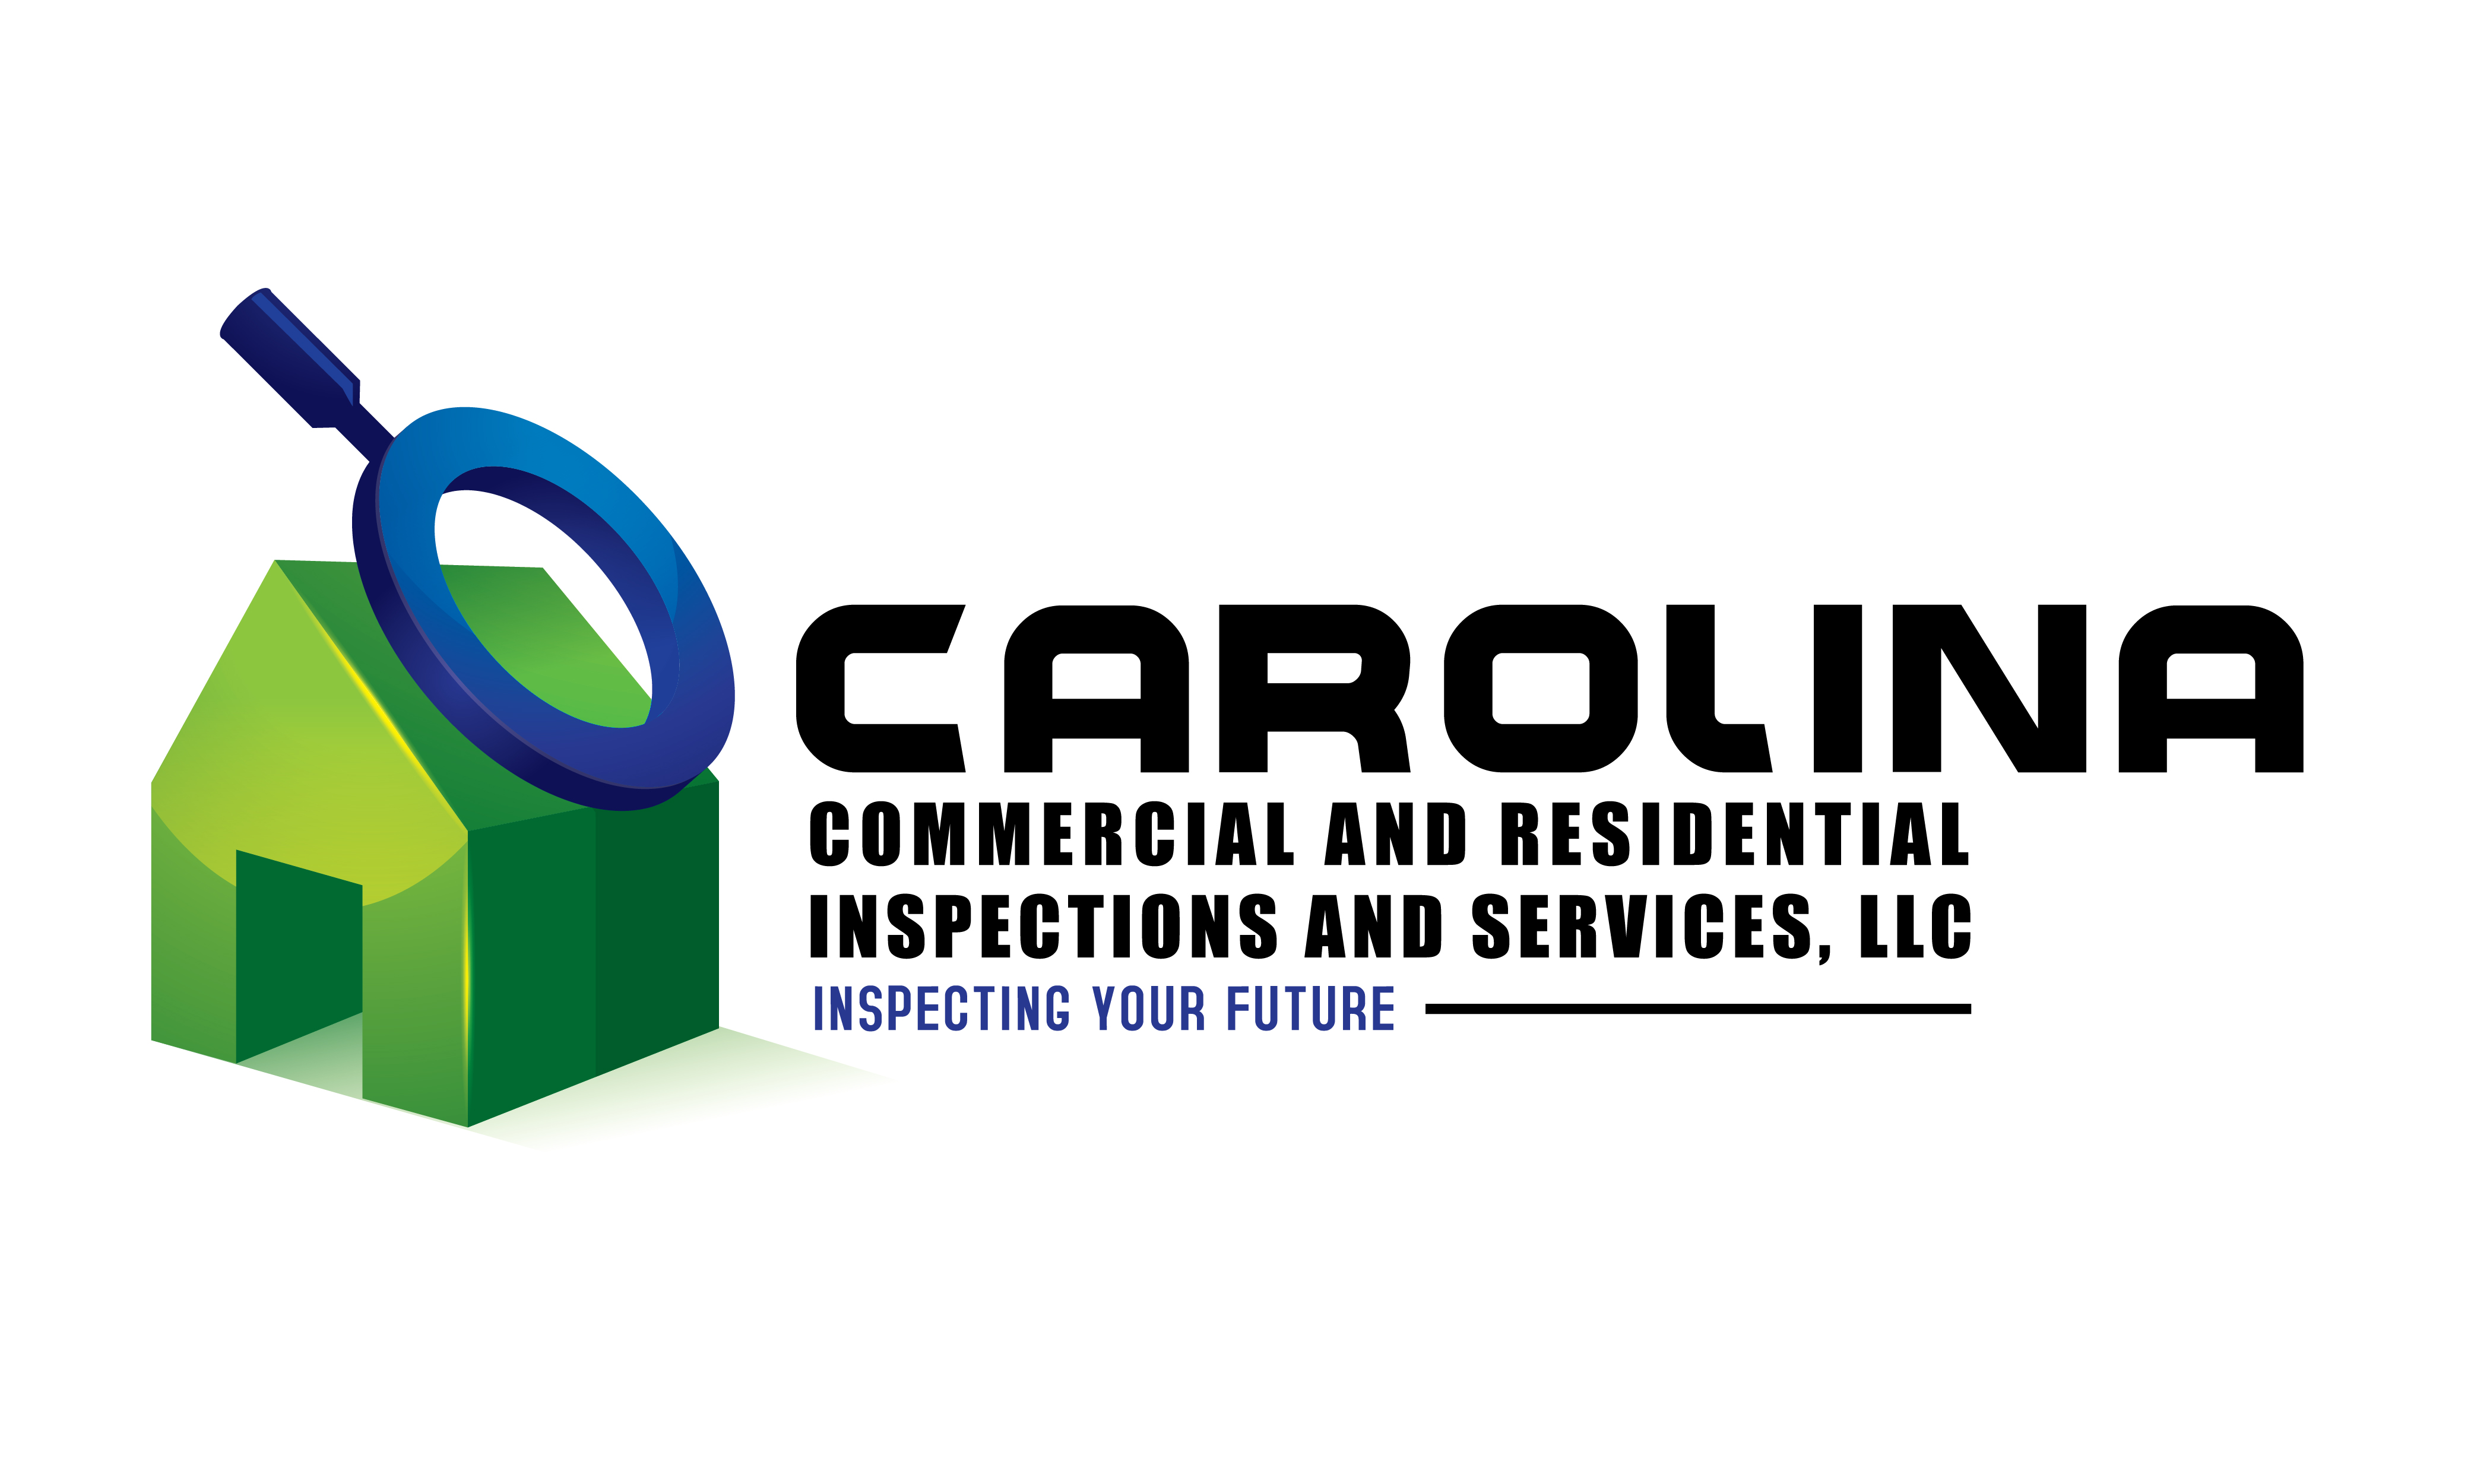 Carolina Commercial and Residential Inspections and Services, LLC Logo